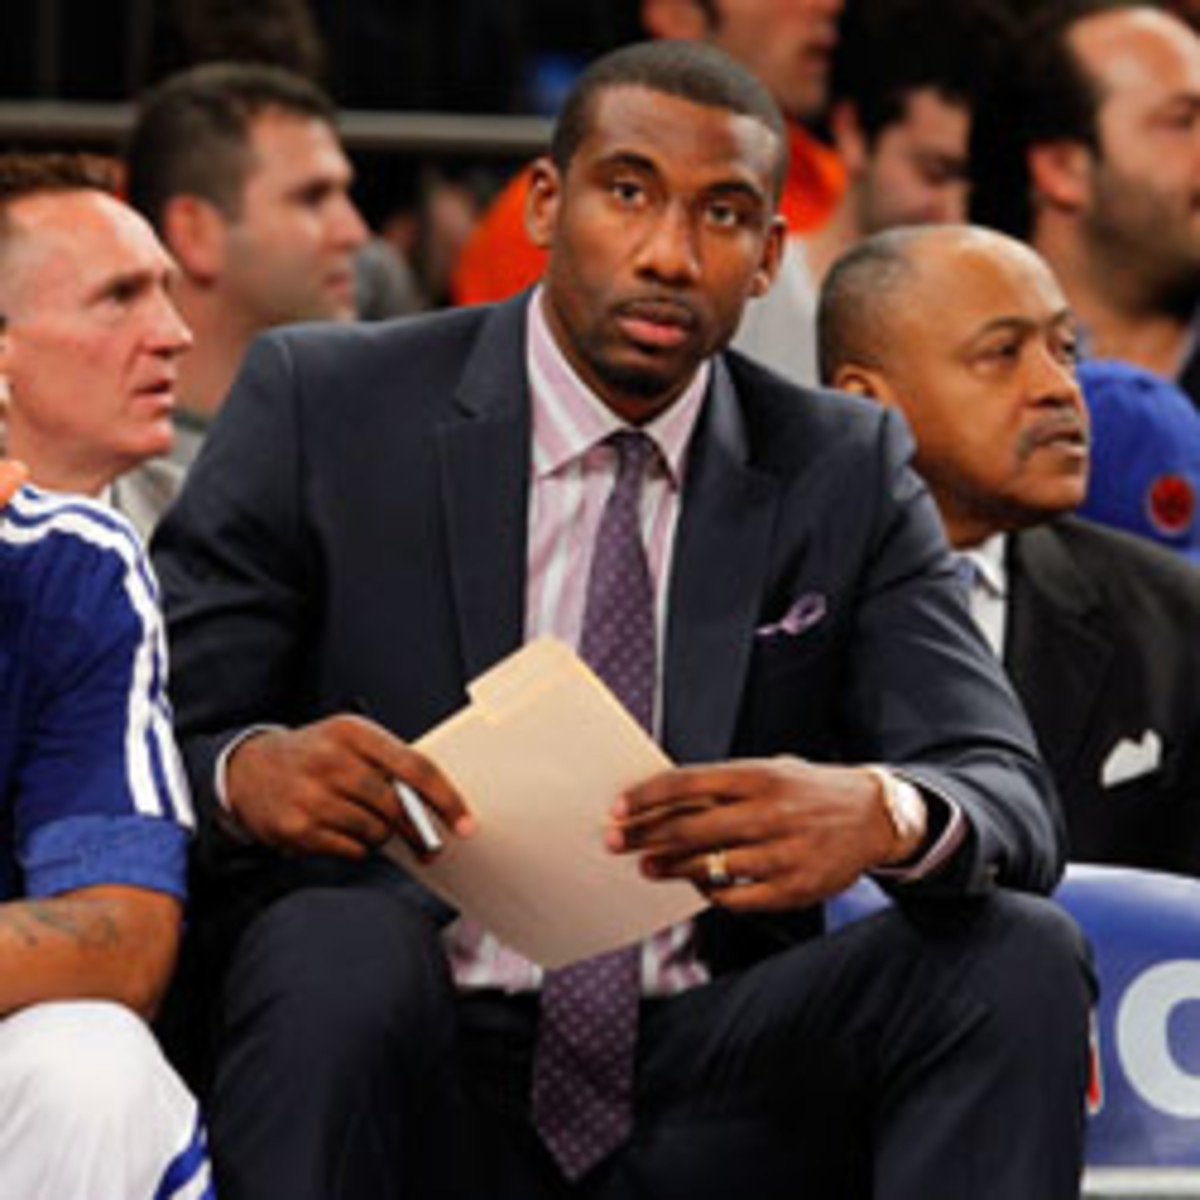 Amare Stoudemire could return to the Knicks for the second round of the playoffs. (Jim McIssac/Getty Images)